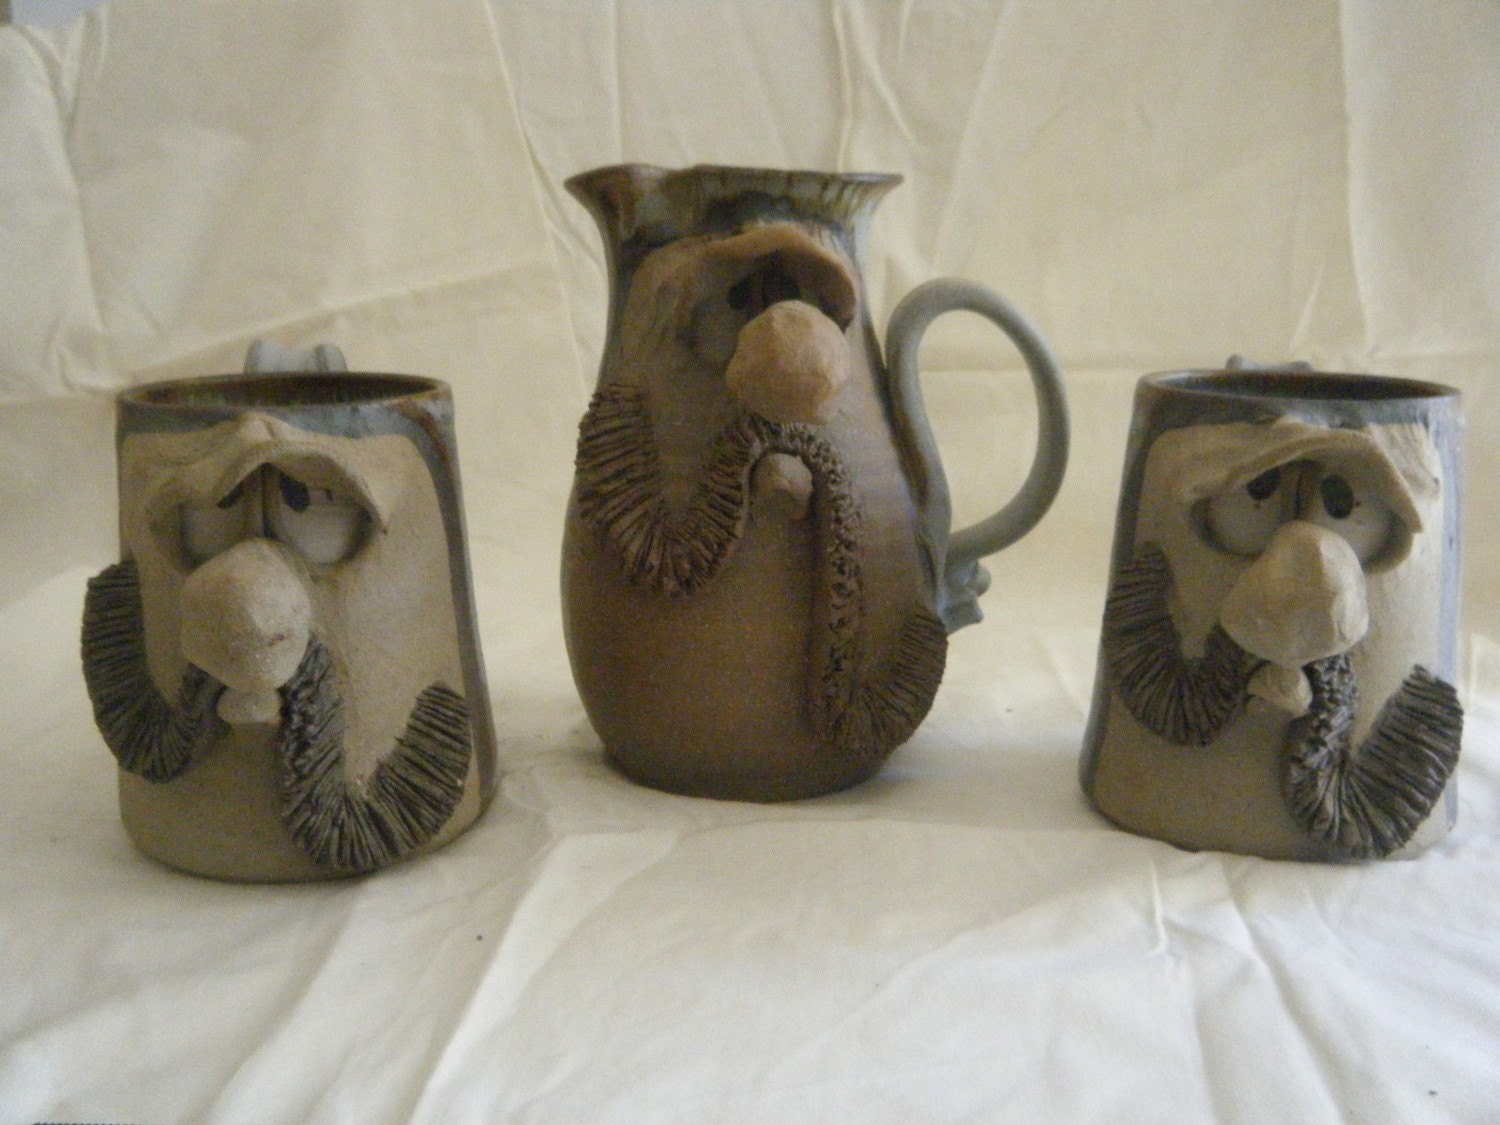 Big Nose Moustache Man Pottery Pitcher and Mugs